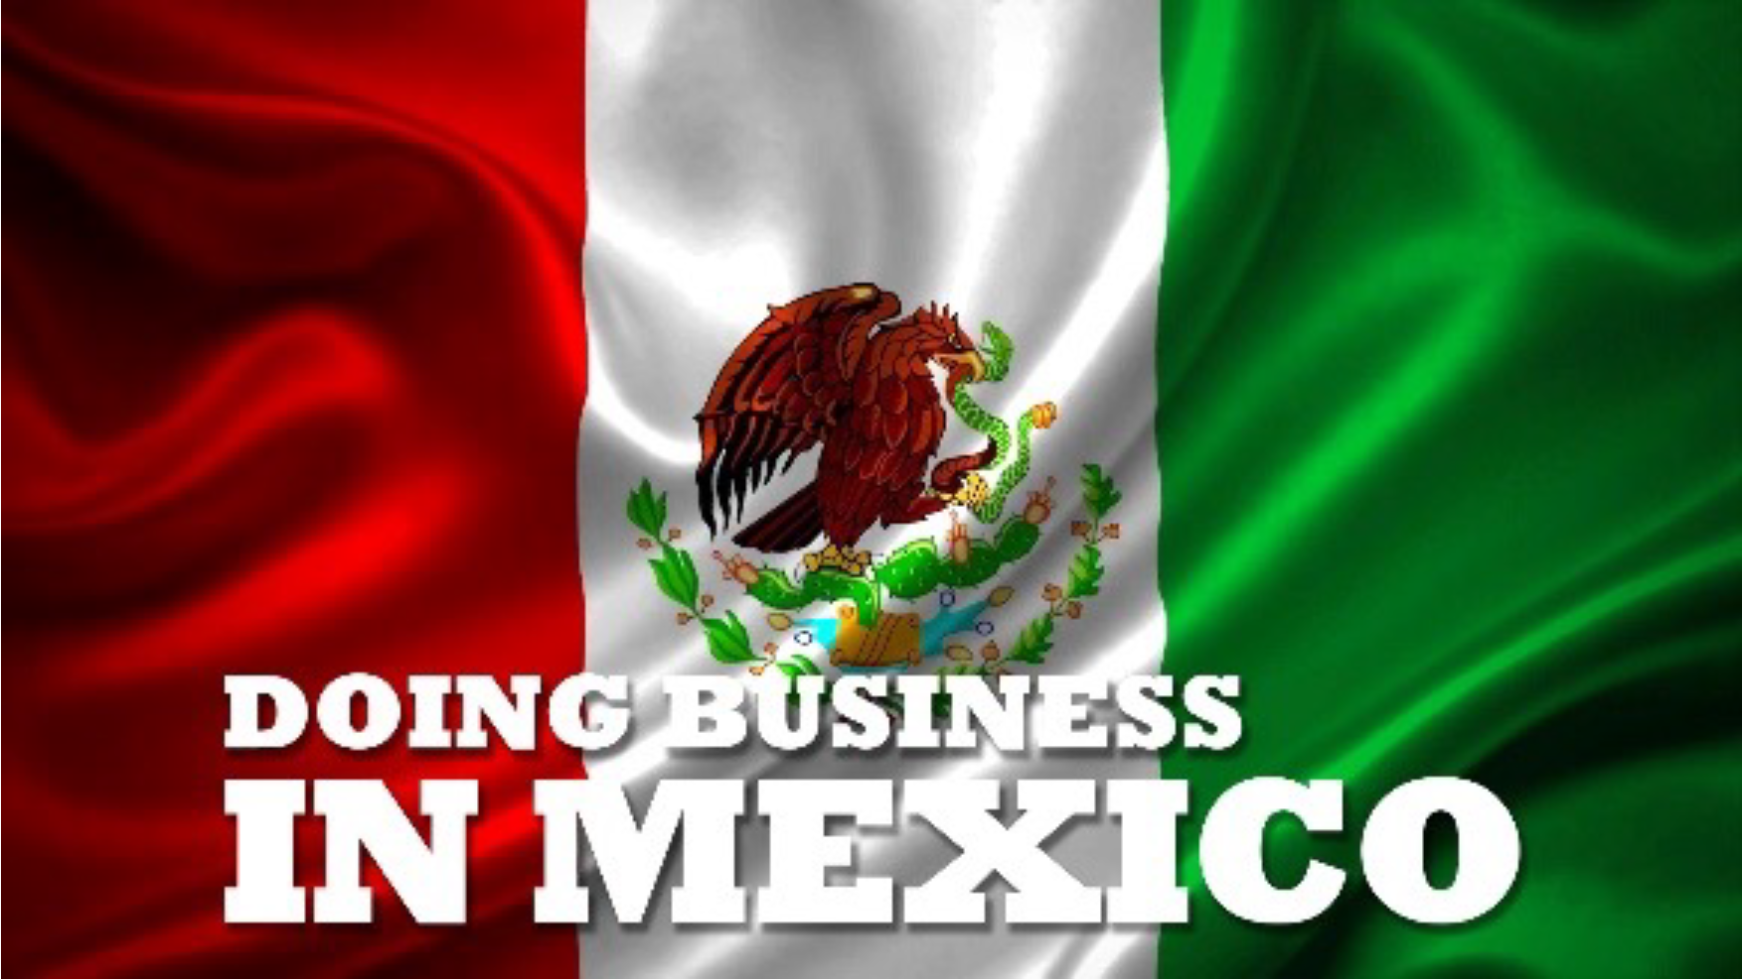 Image: Mexican flag. Text: Doing Business in Mexico